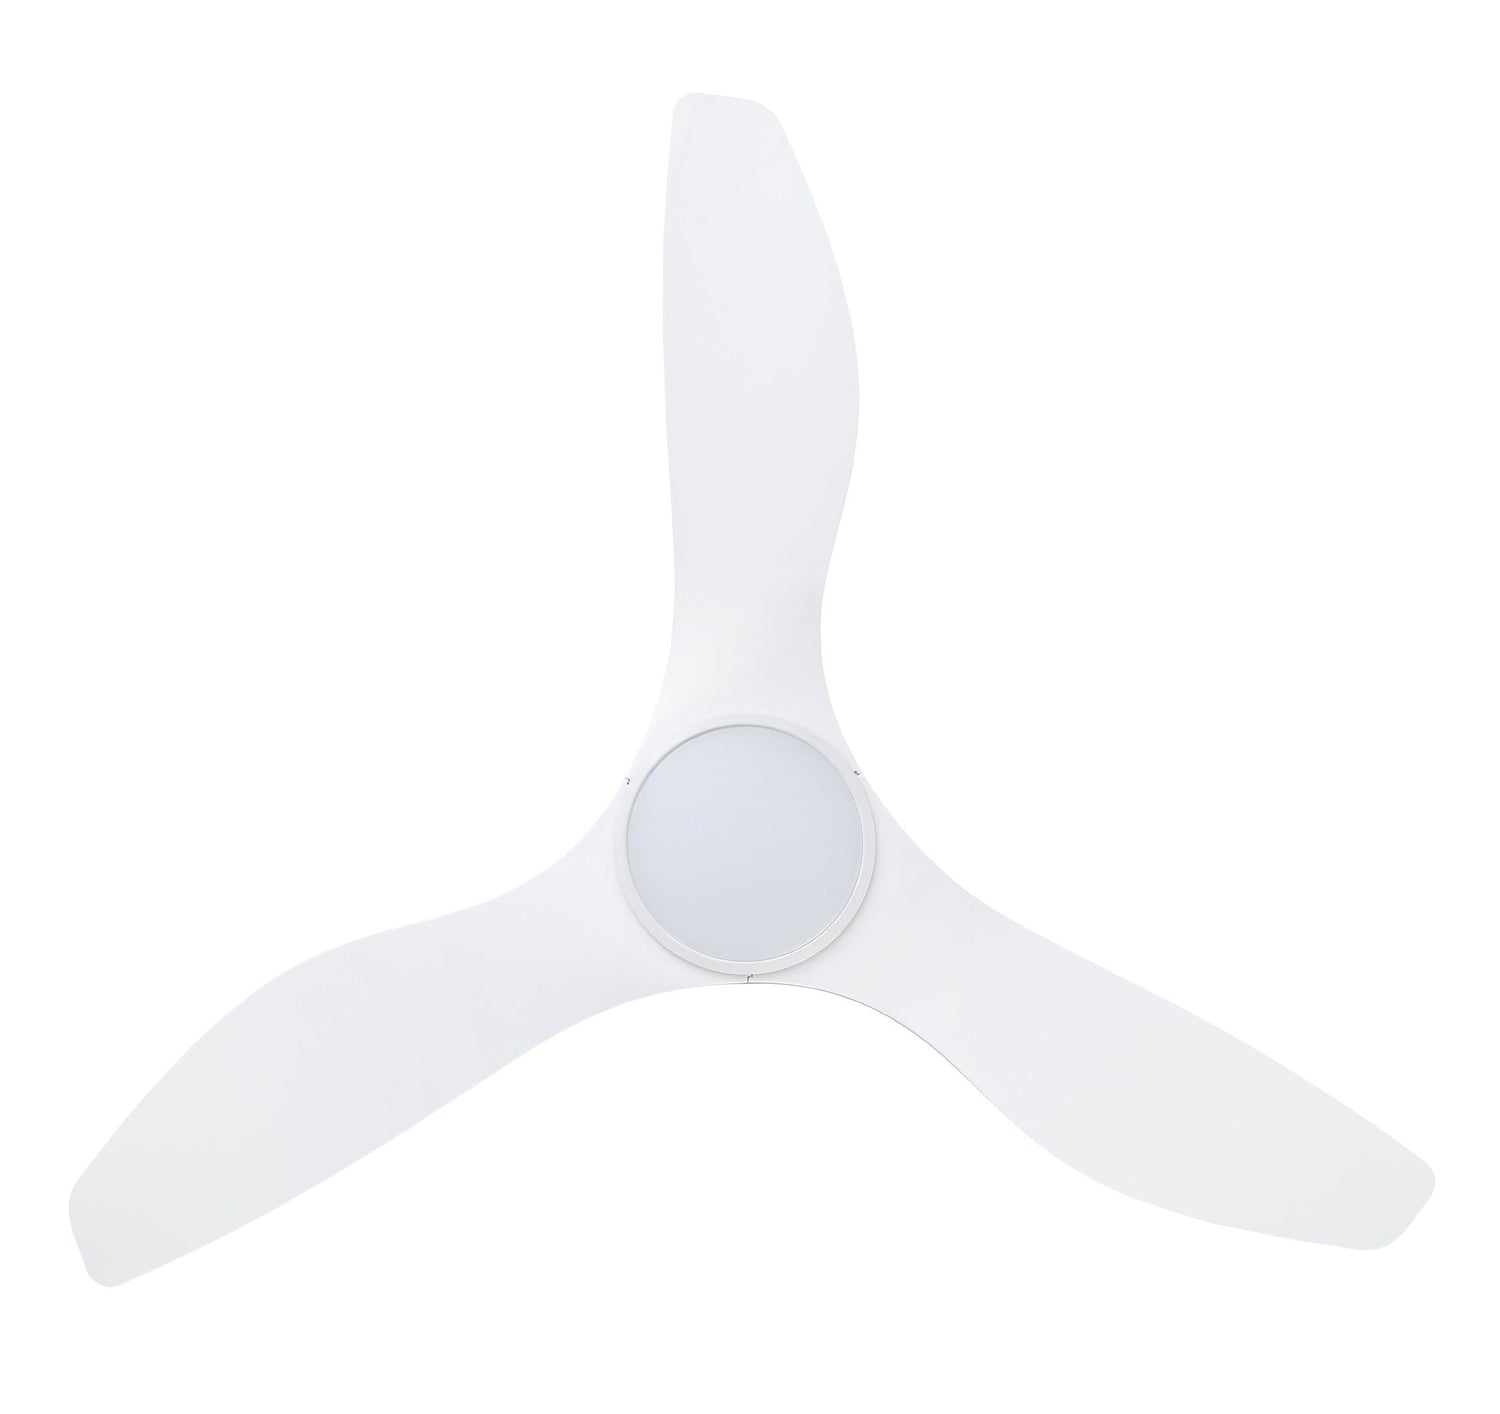 Surf 48&quot;/1220mm 3 Blade White with LED Light DC Motor ABS Ceiling Fan